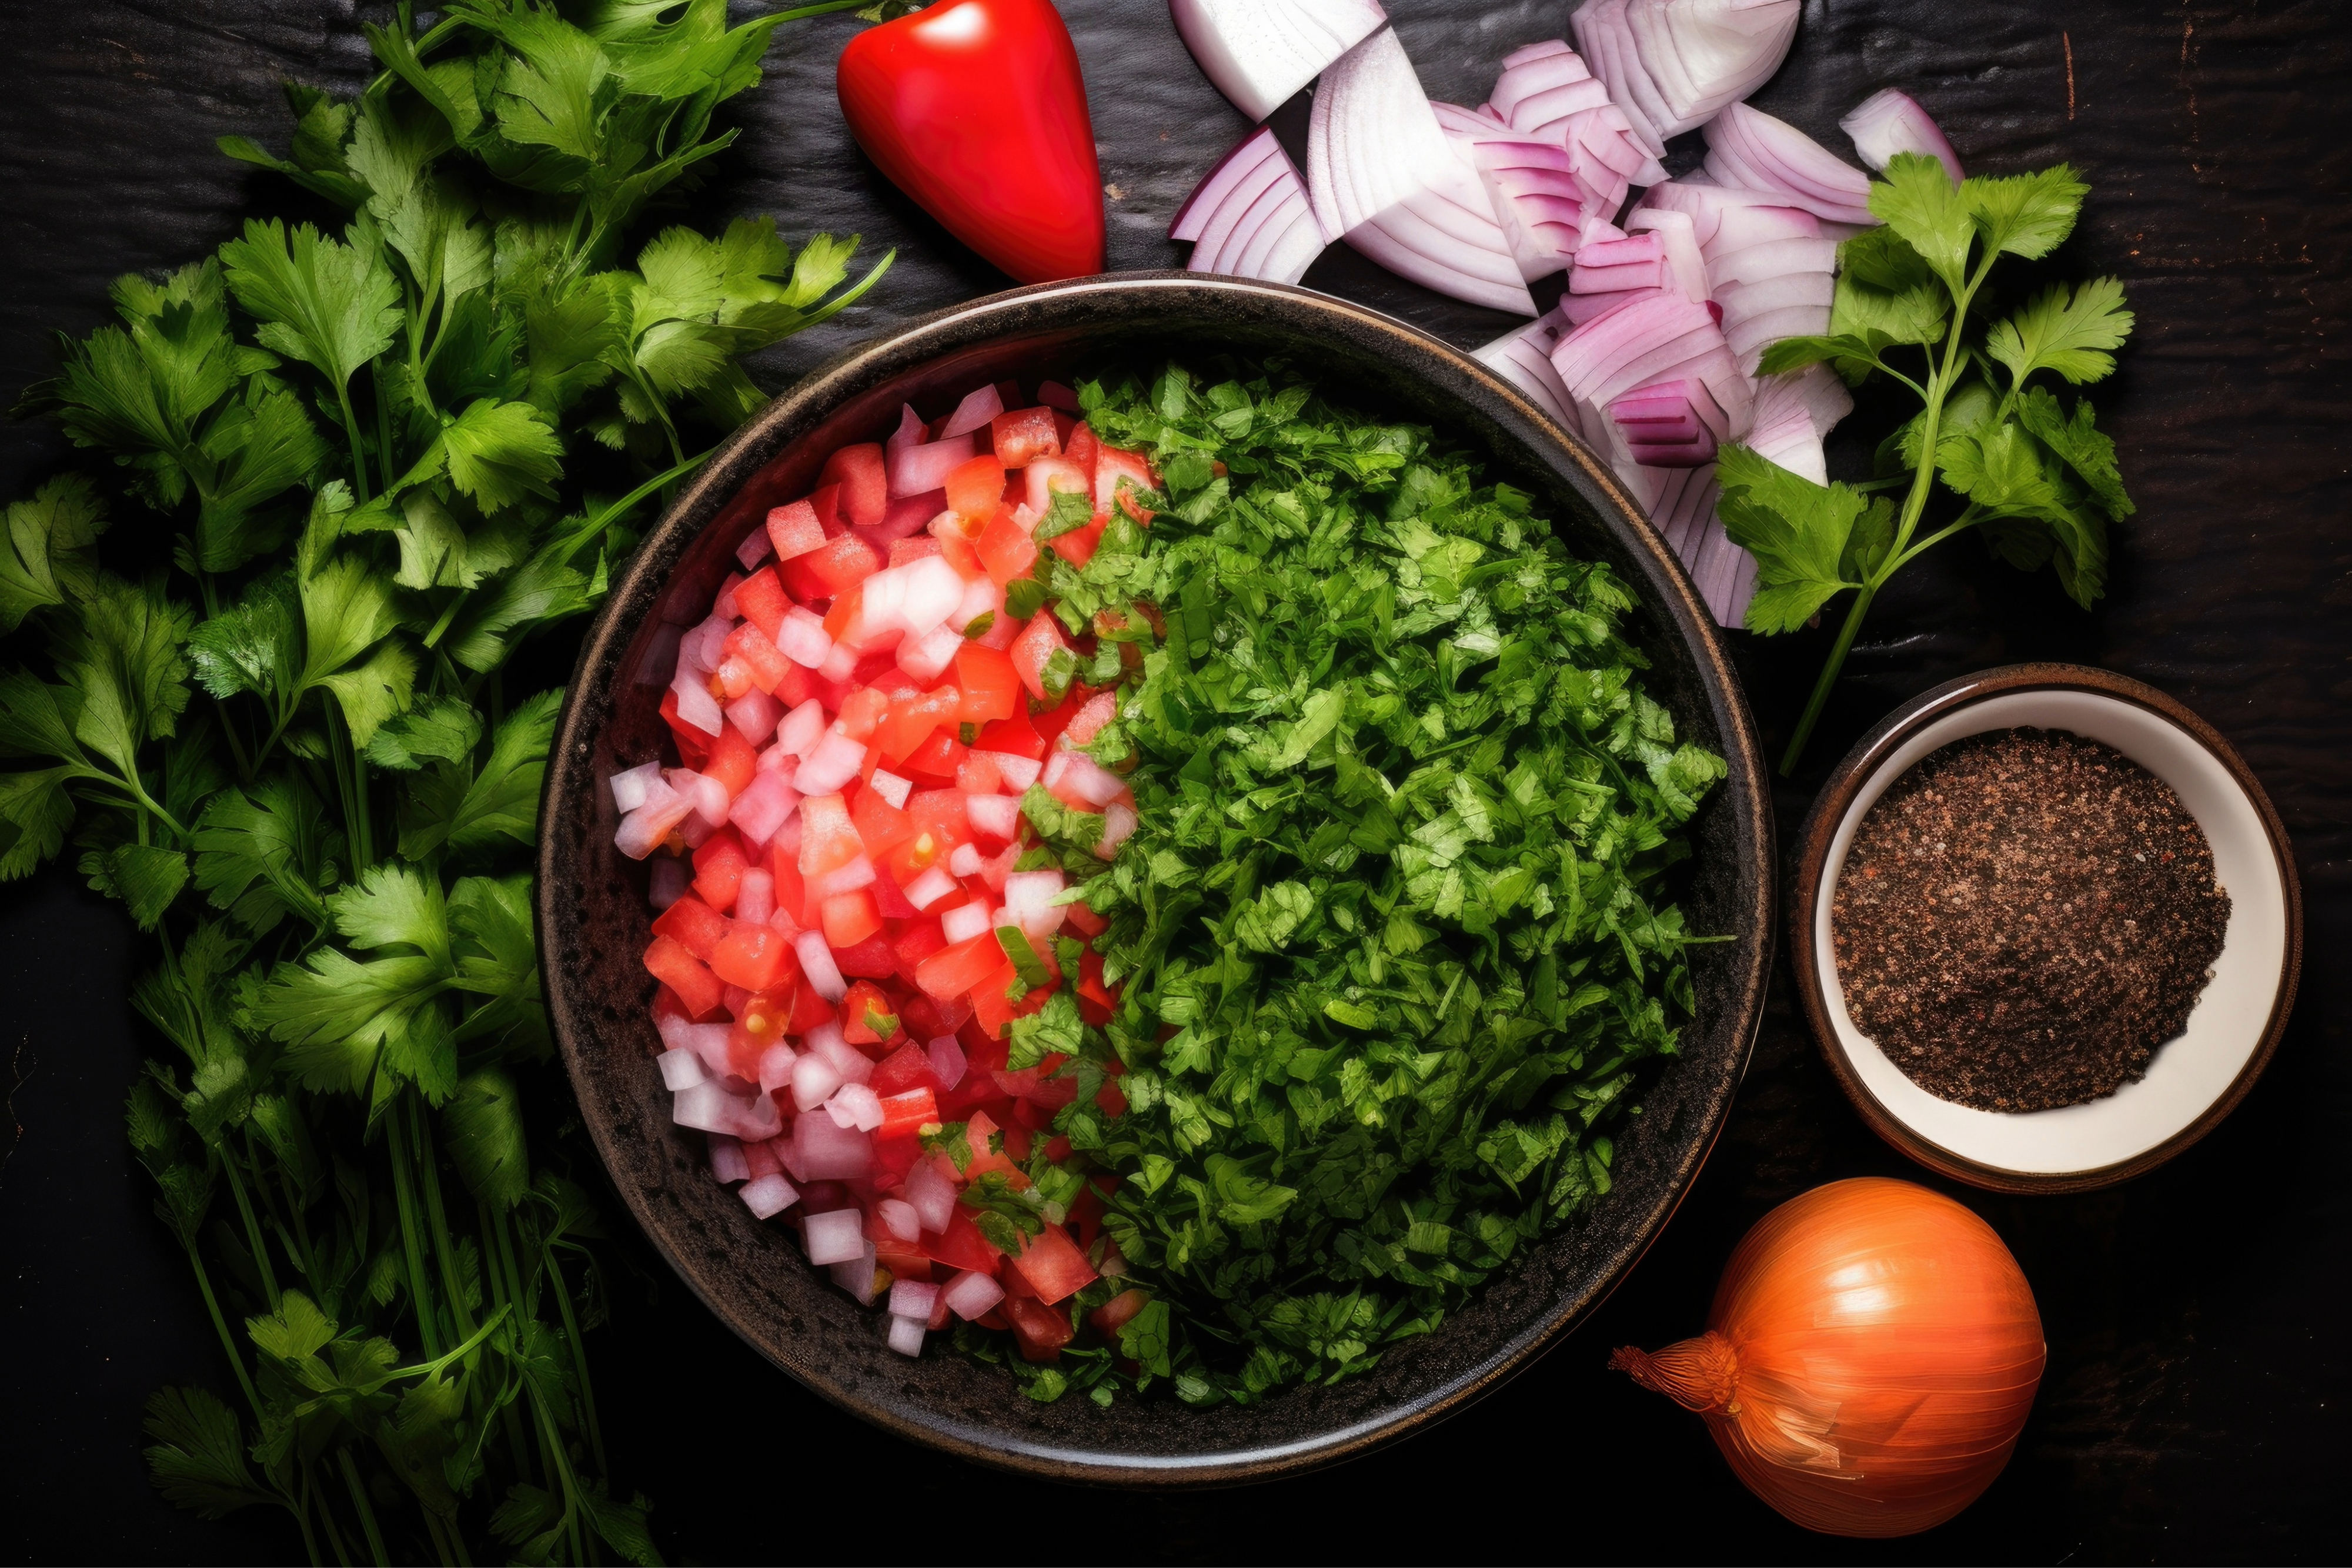 Top view of Pico de Gallo ingredients mixed in a bowl